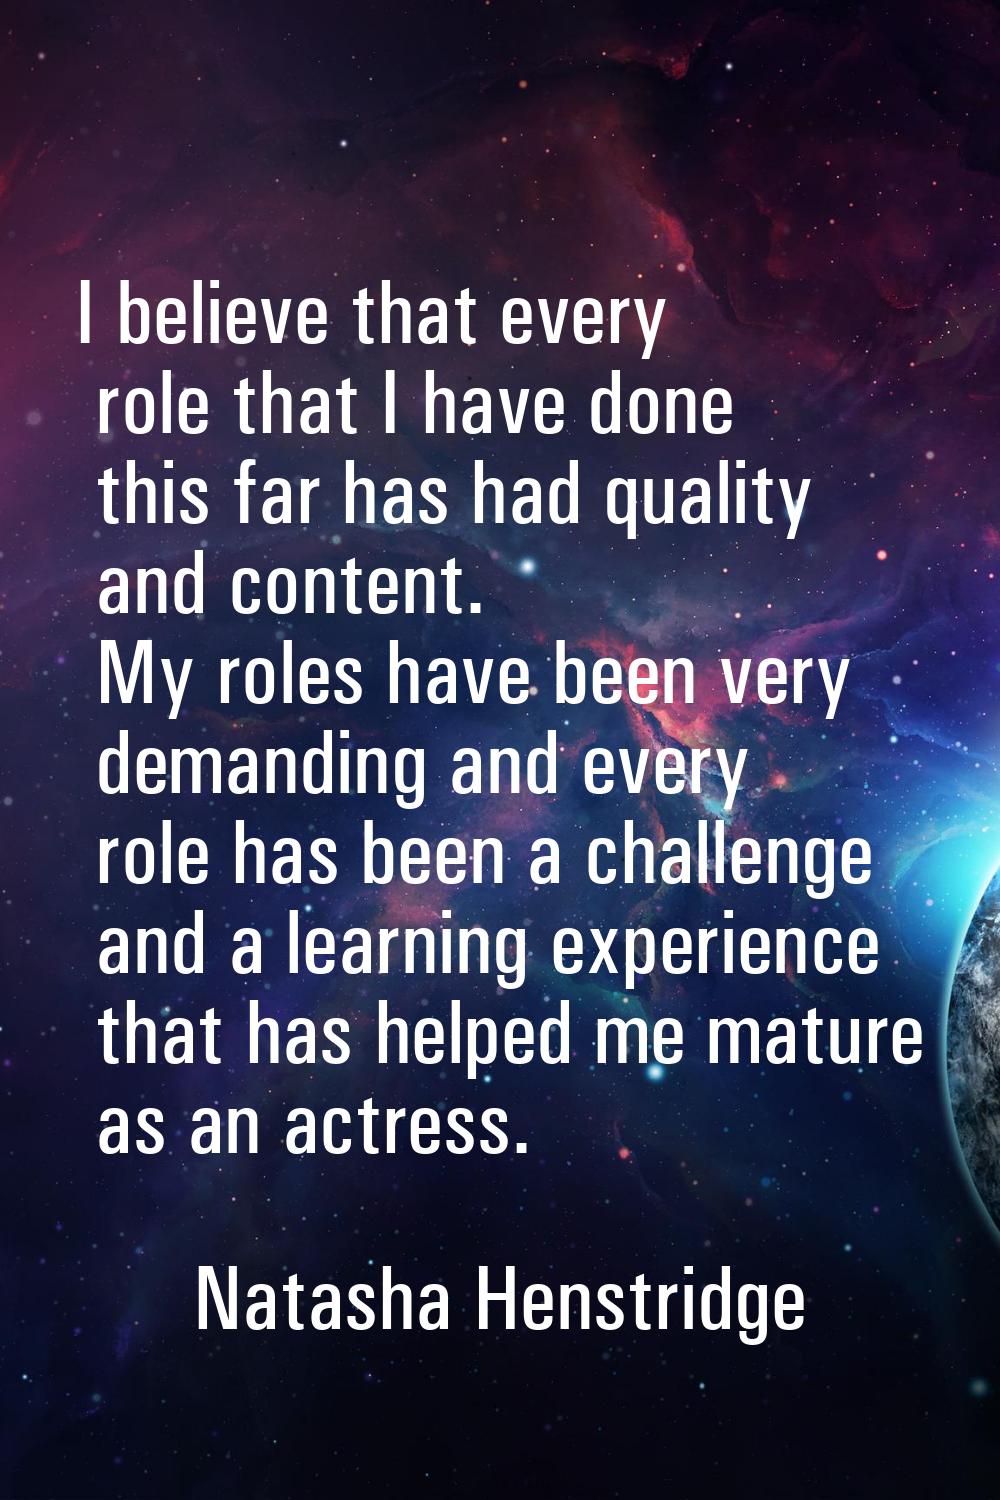 I believe that every role that I have done this far has had quality and content. My roles have been